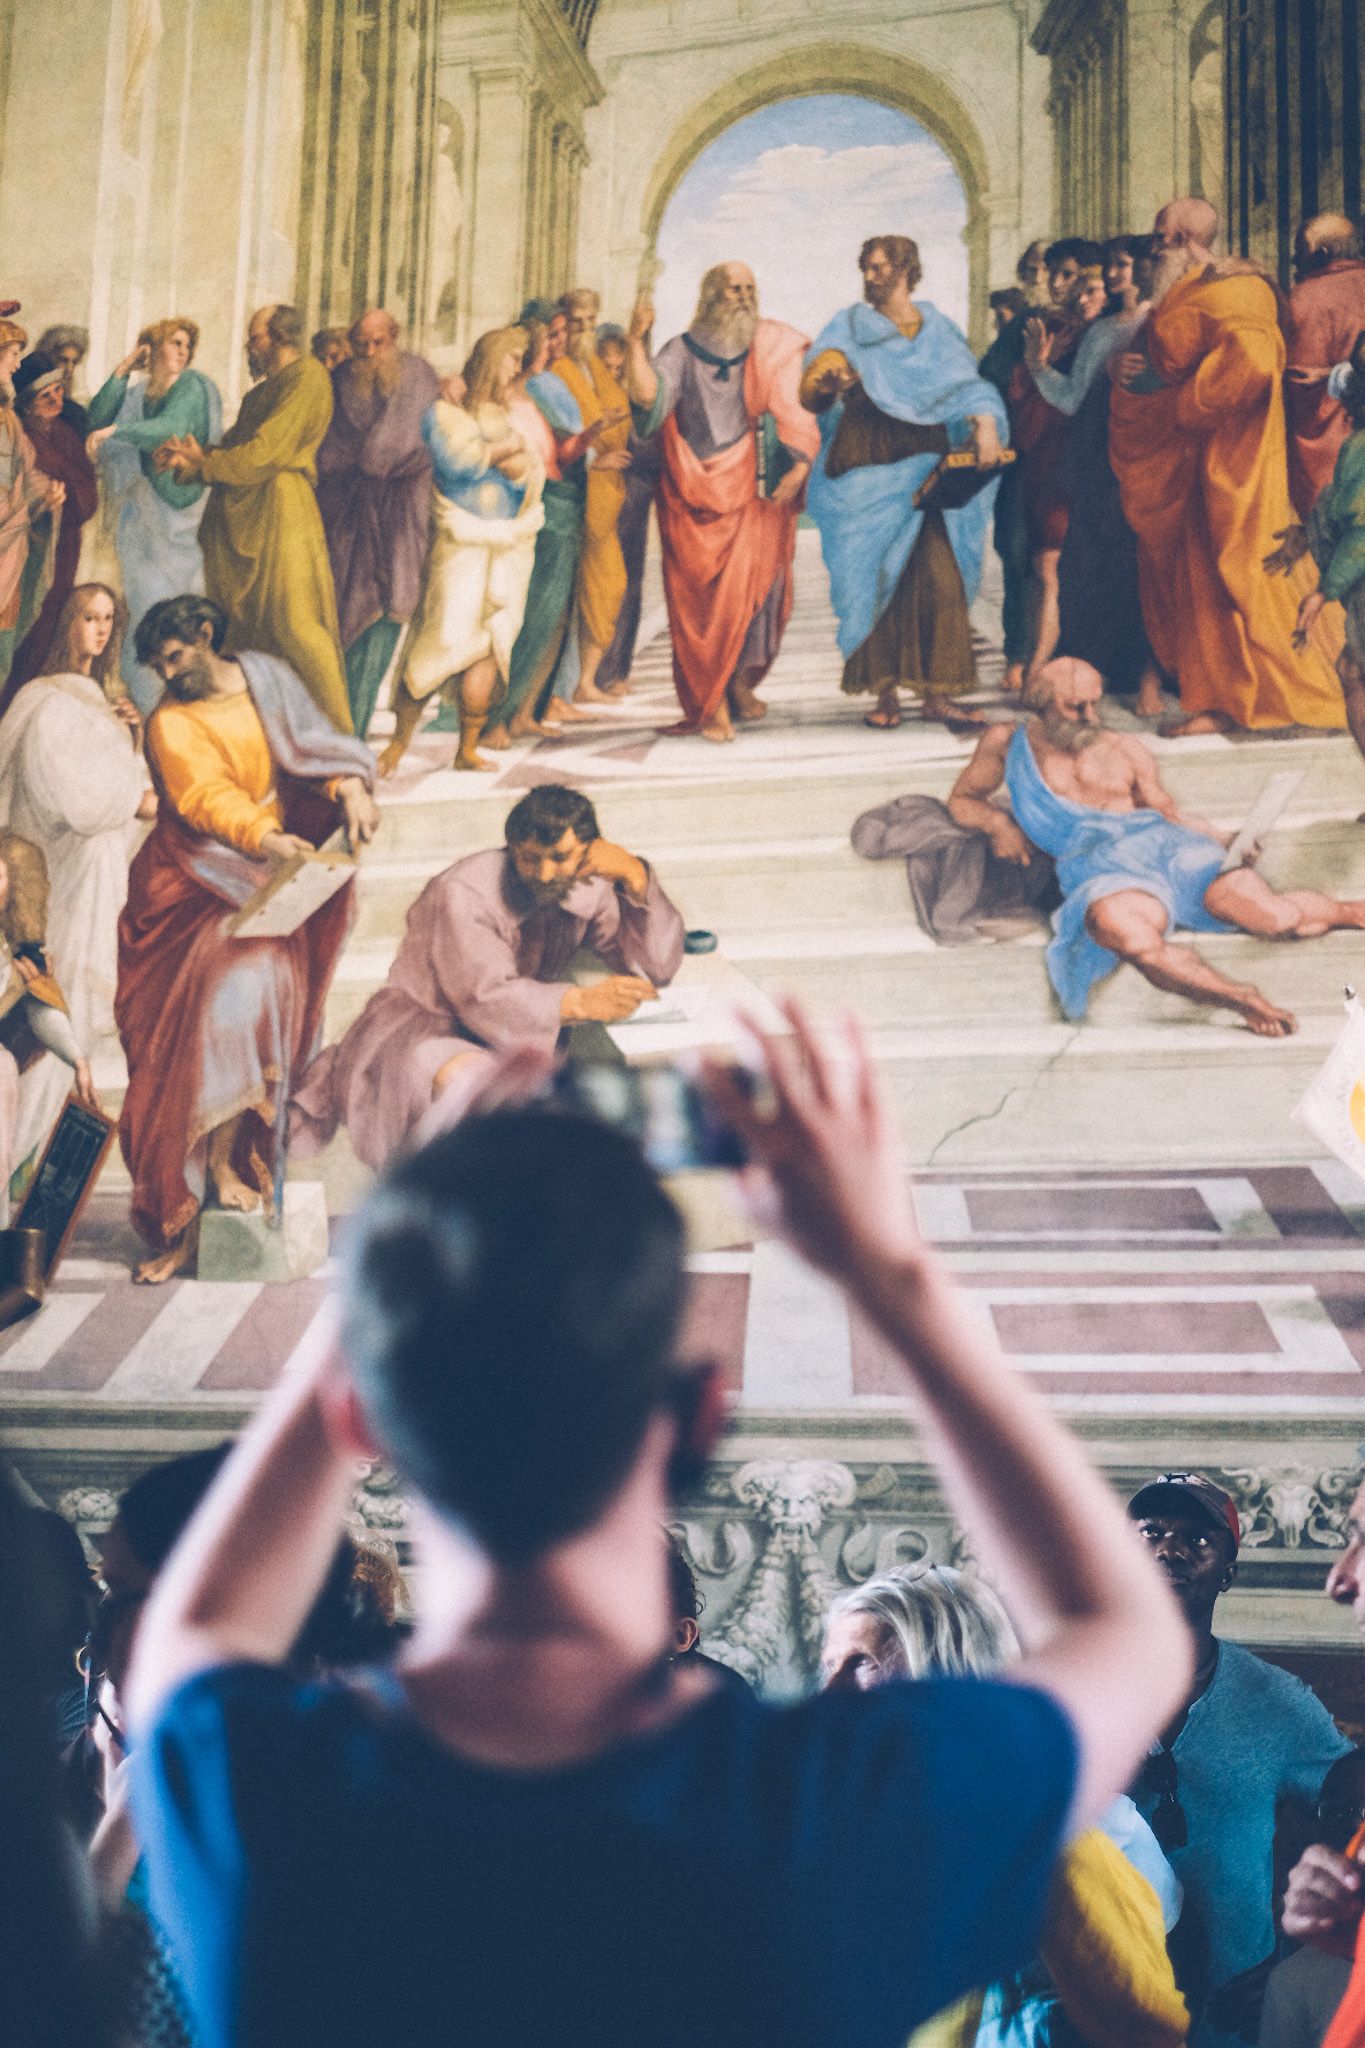 In the foreground out of focus, a man holds up a phone to take a photo of Raphael’s painting “The School of Athens” in the Vatican.